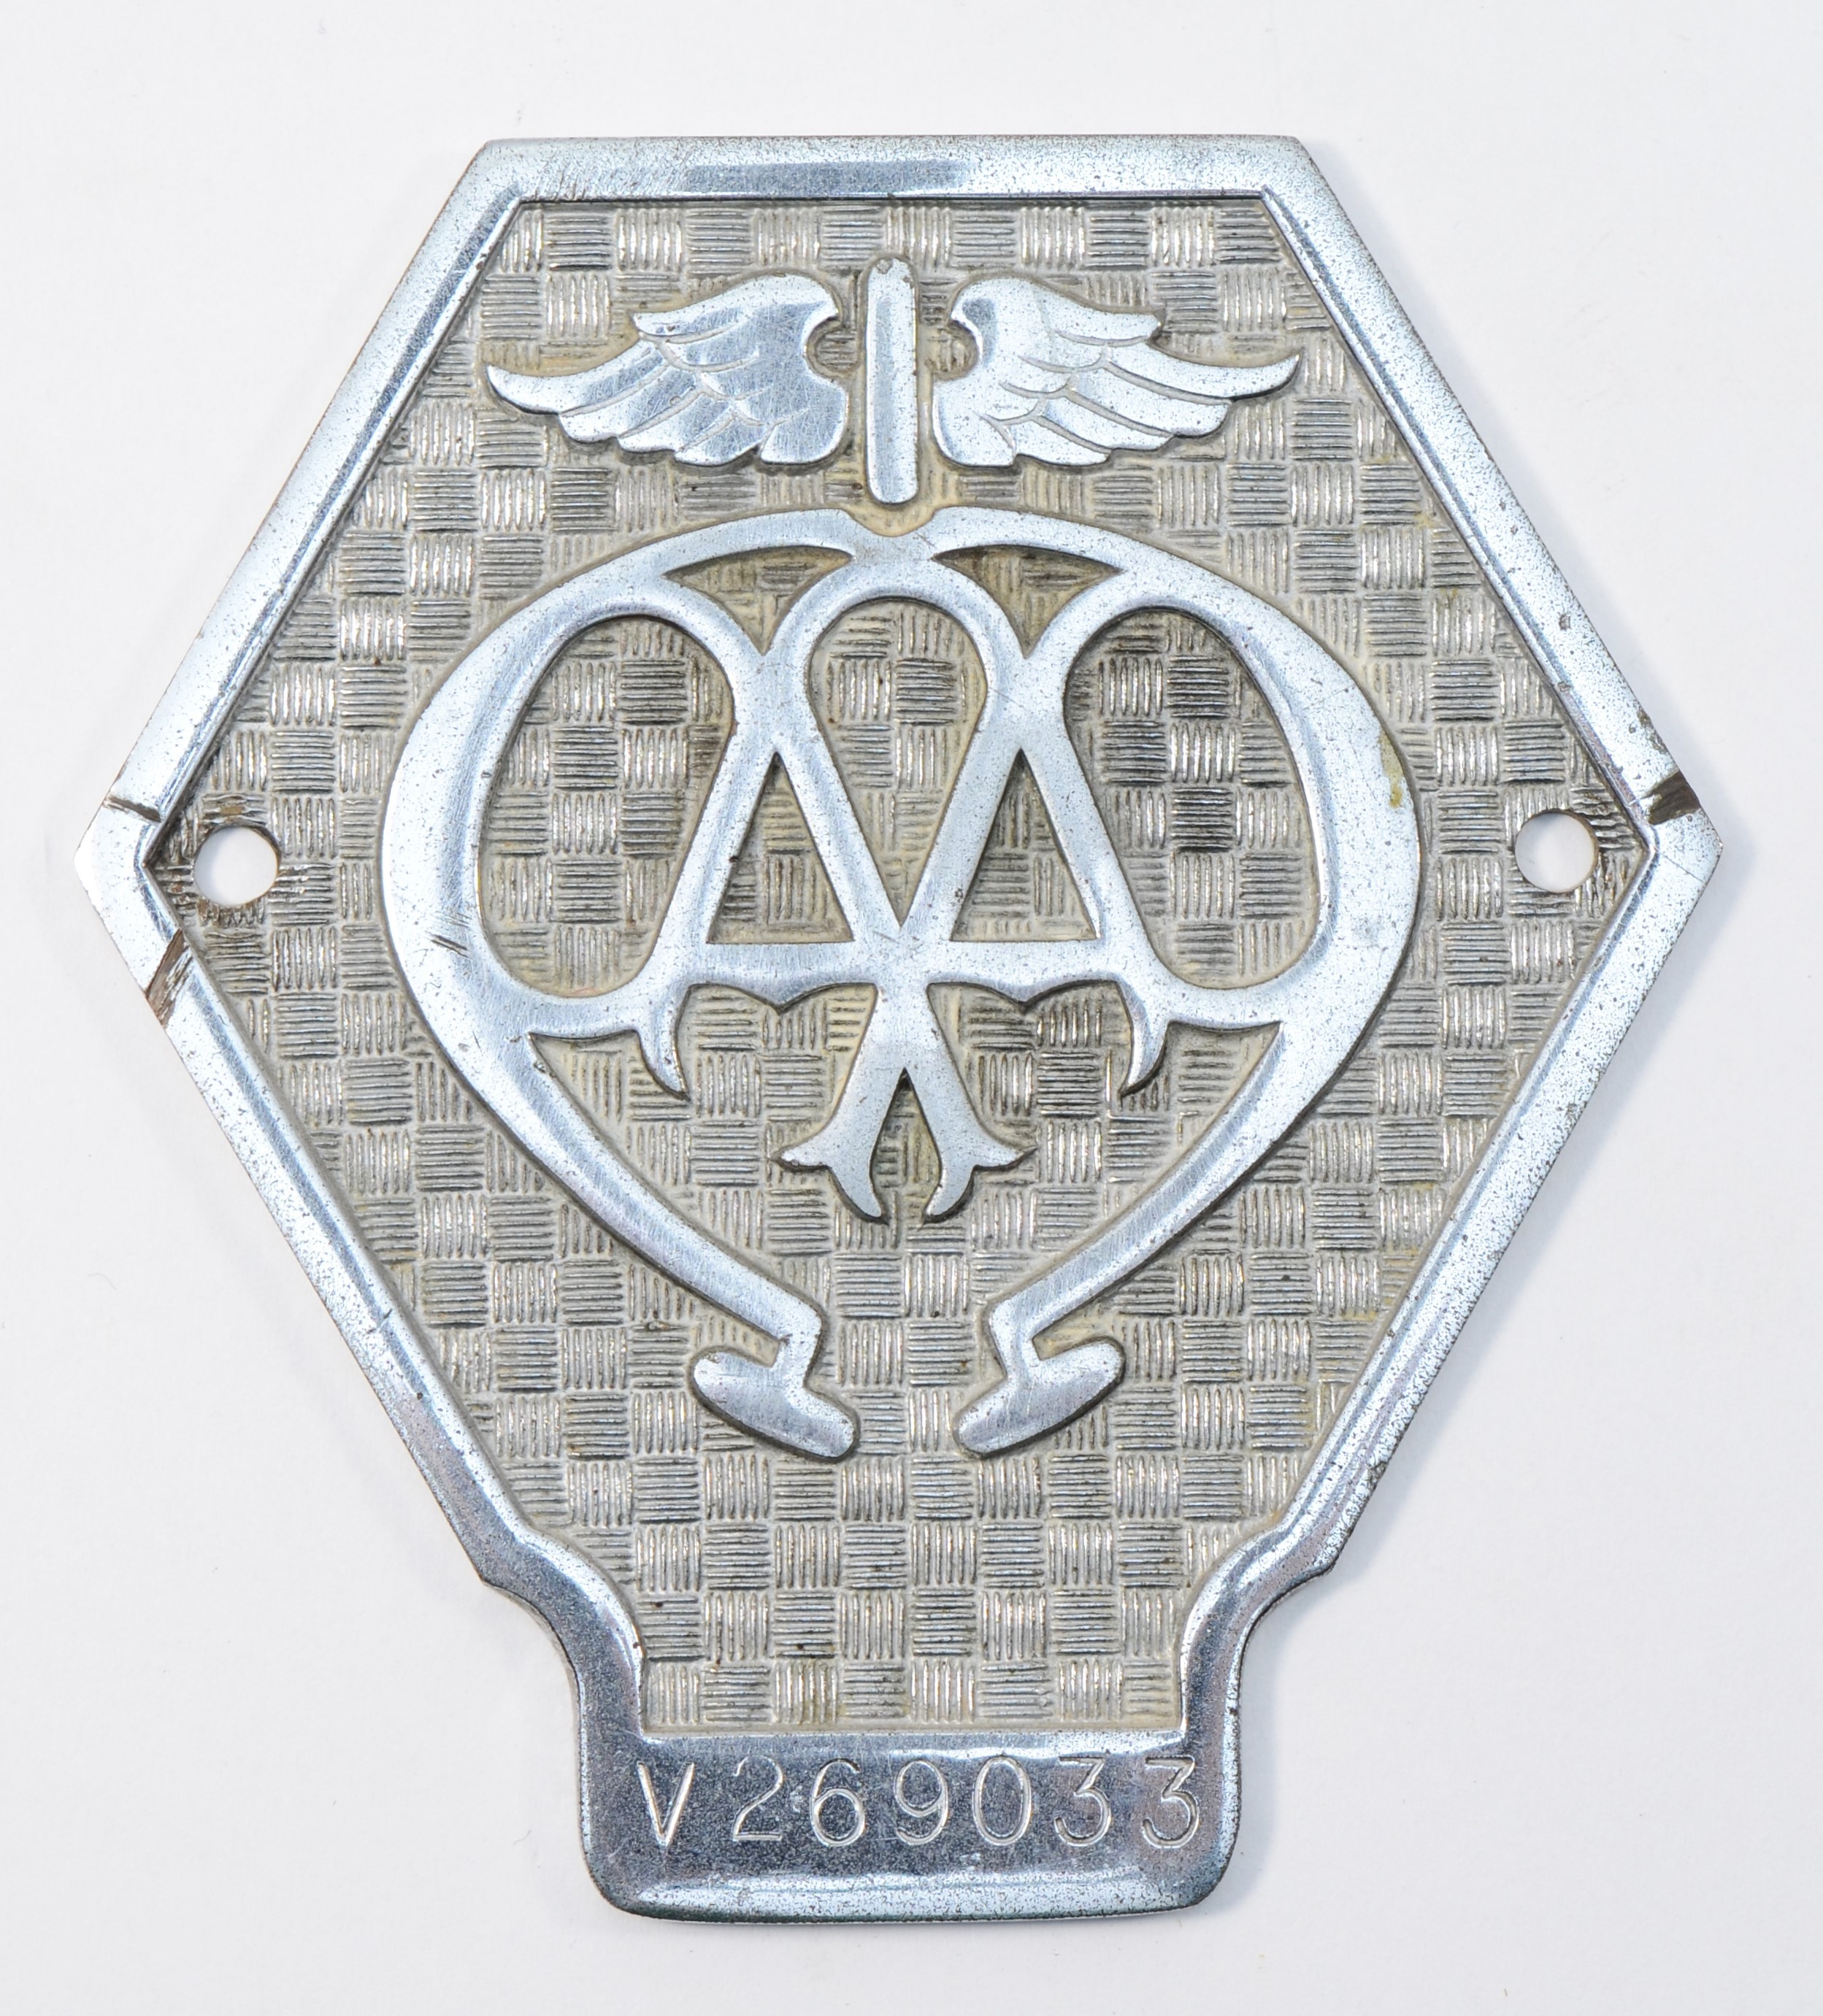 An AA commercial basket weave grill badge, no. V269033